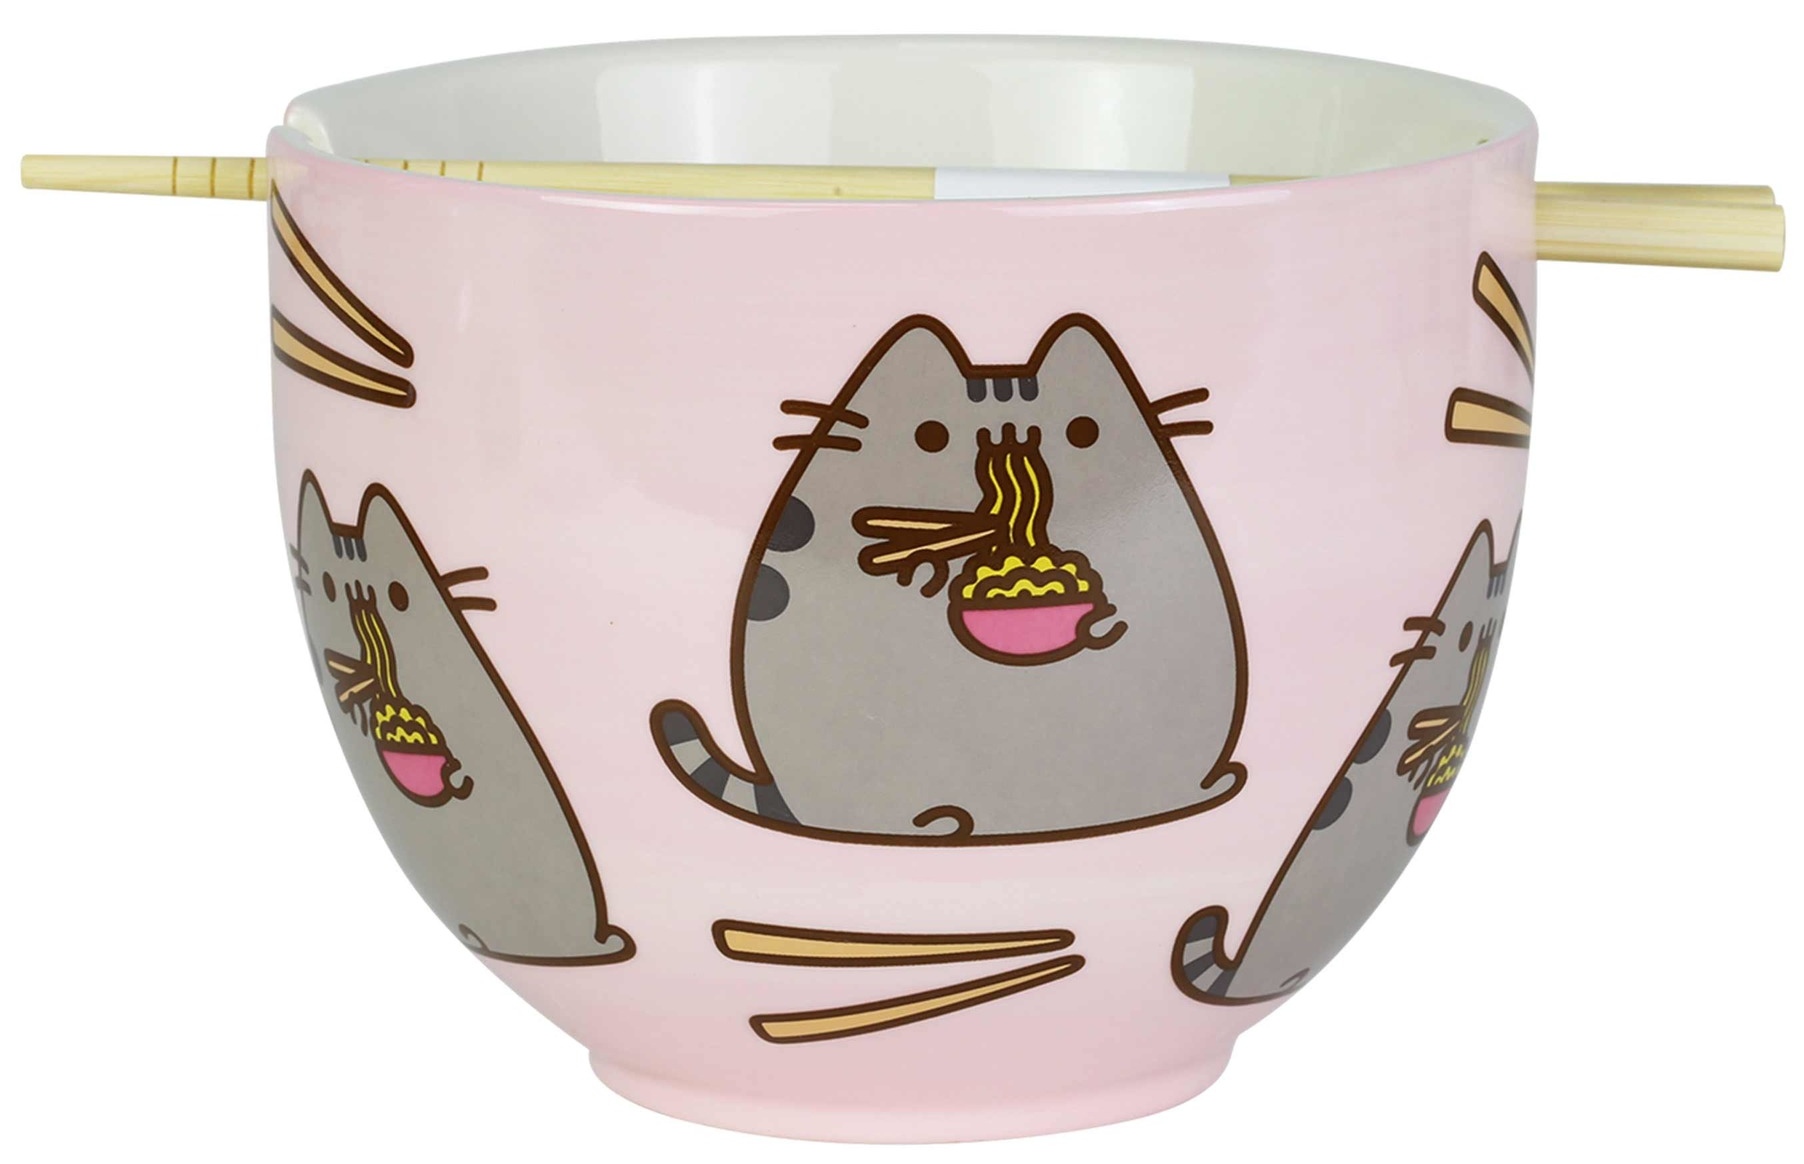 Pusheen by Our Name Is Mud 6004629 Ramen Bowl